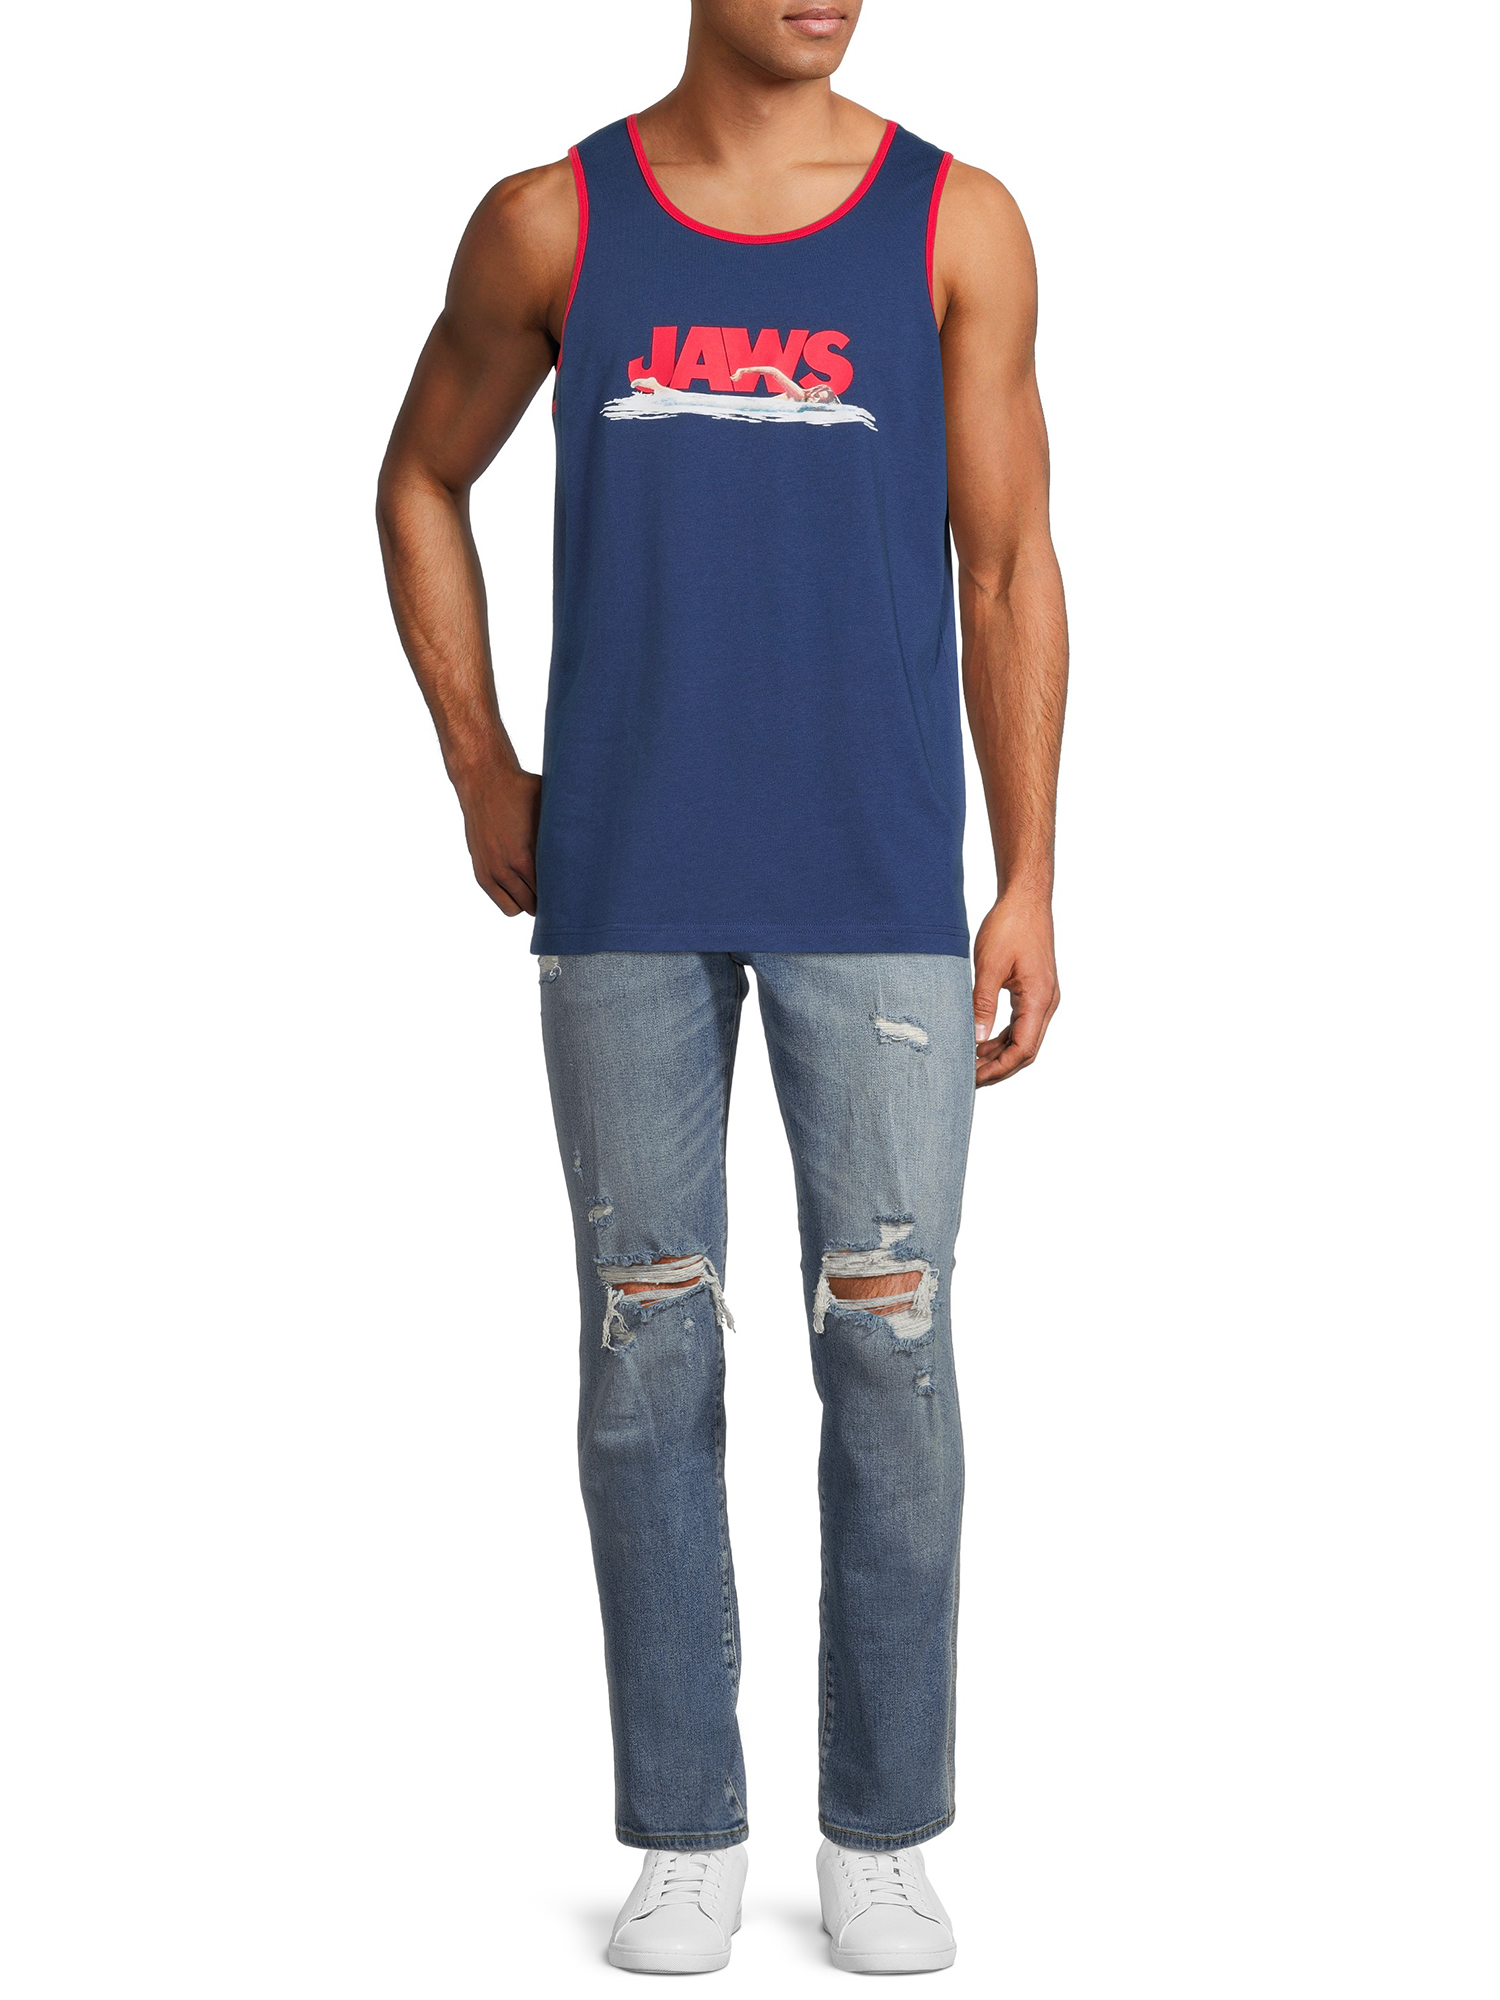 Universal by Jaws Sleeveless Graphic Print Tank Top (Men's or Men's Big & Tall) 2 Pack - image 4 of 9